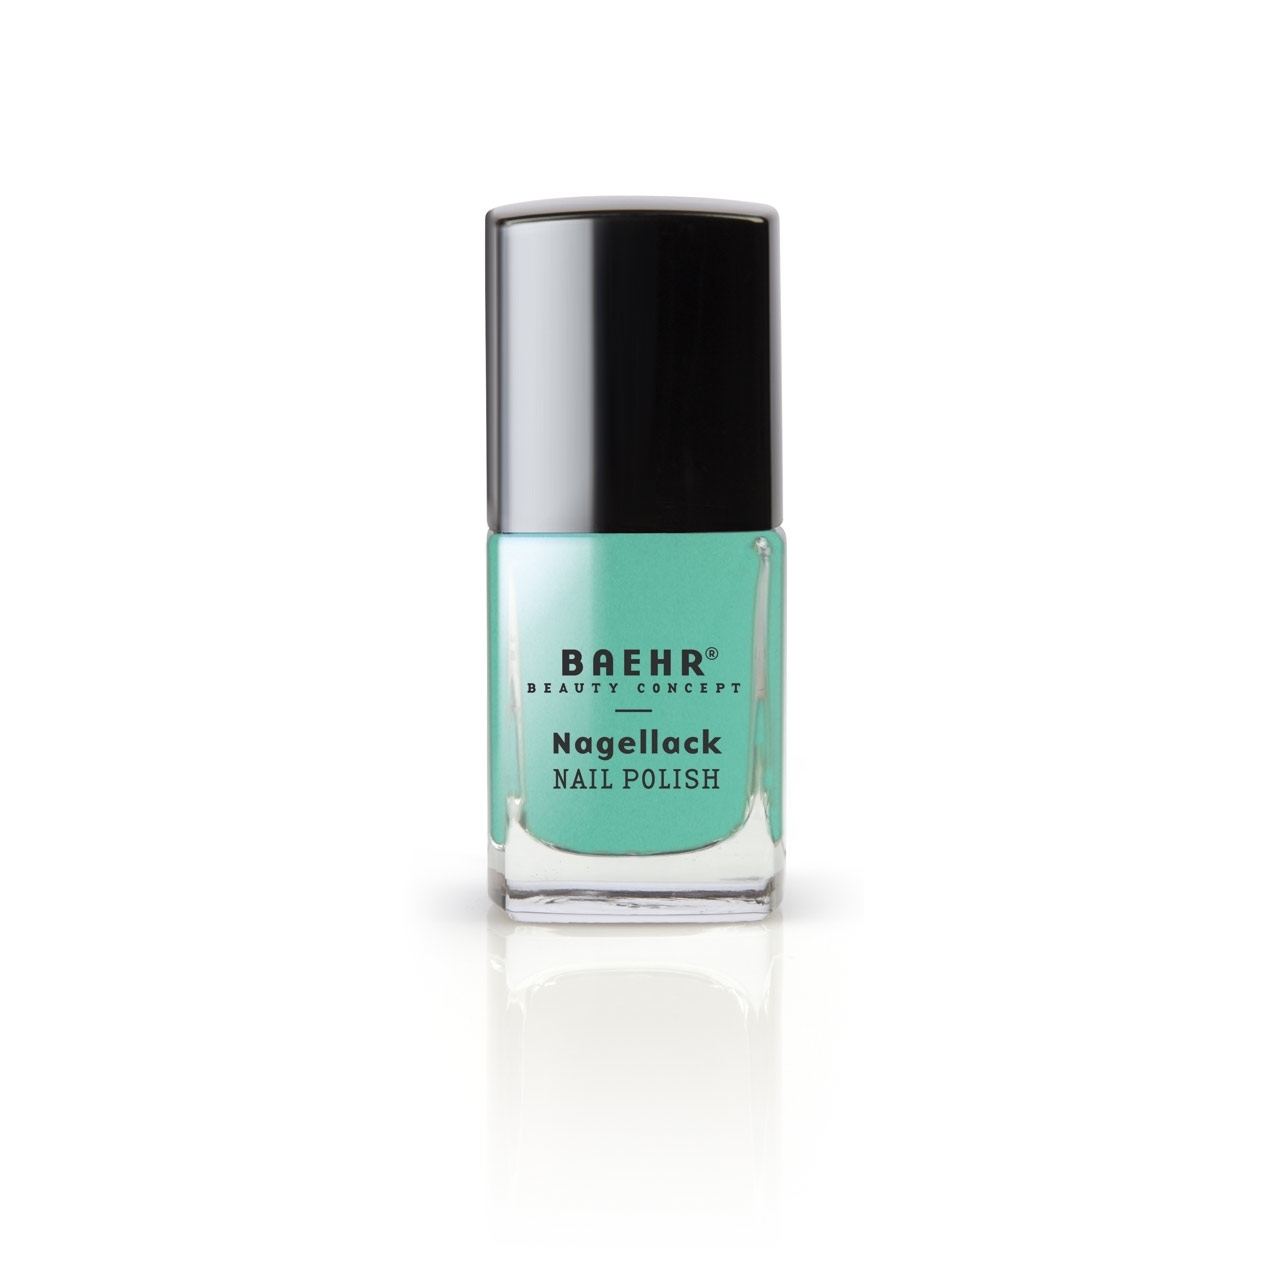 BAEHR BEAUTY CONCEPT - NAILS Nagellack mint soft pastell 11 ml